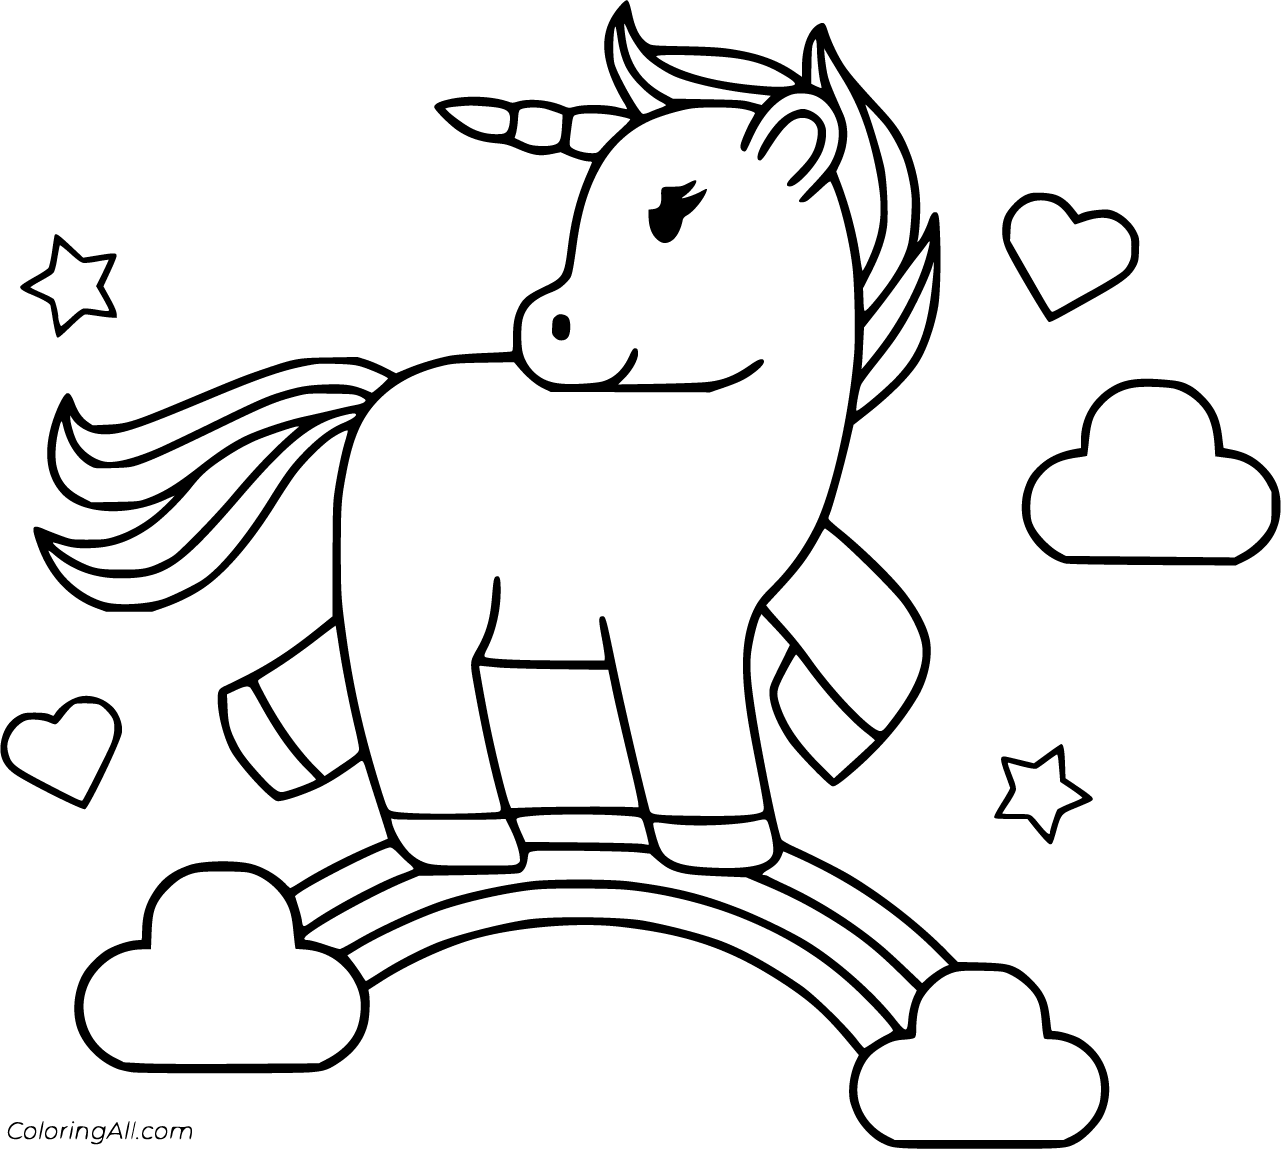 Unicorn rainbow coloring pages